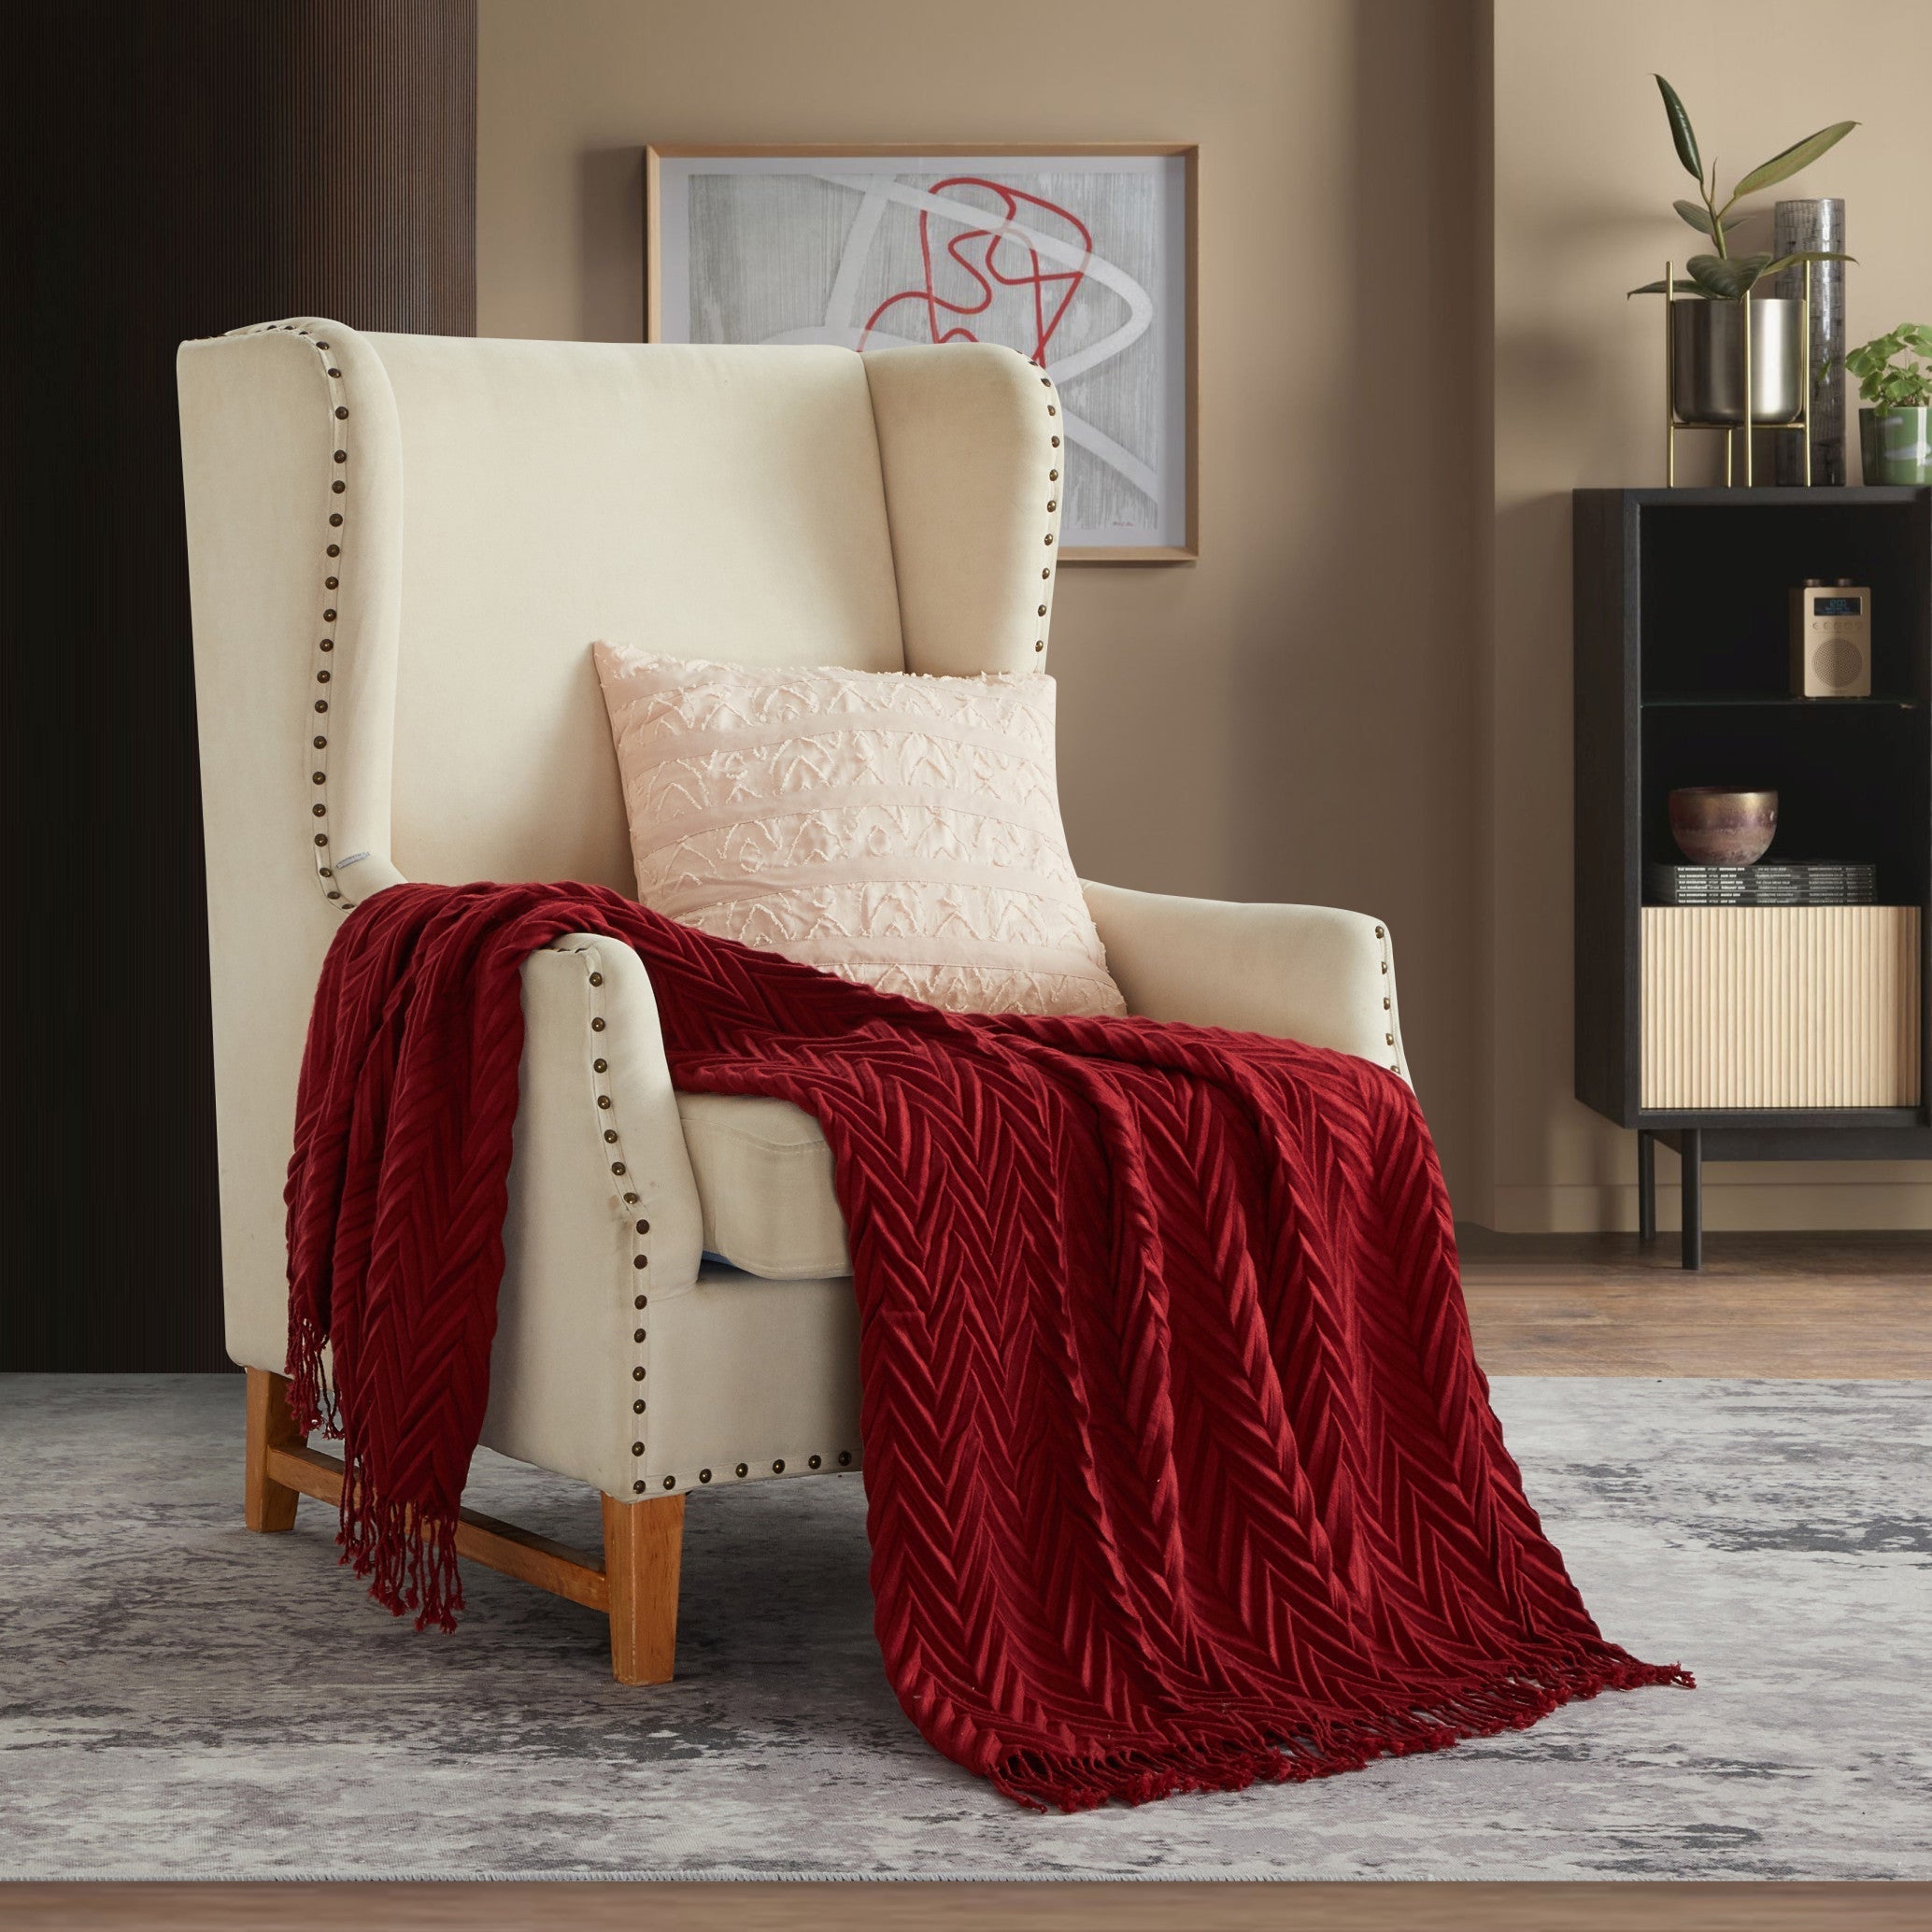 NY&C Home Foremost Ruched Throw Blanket Wine